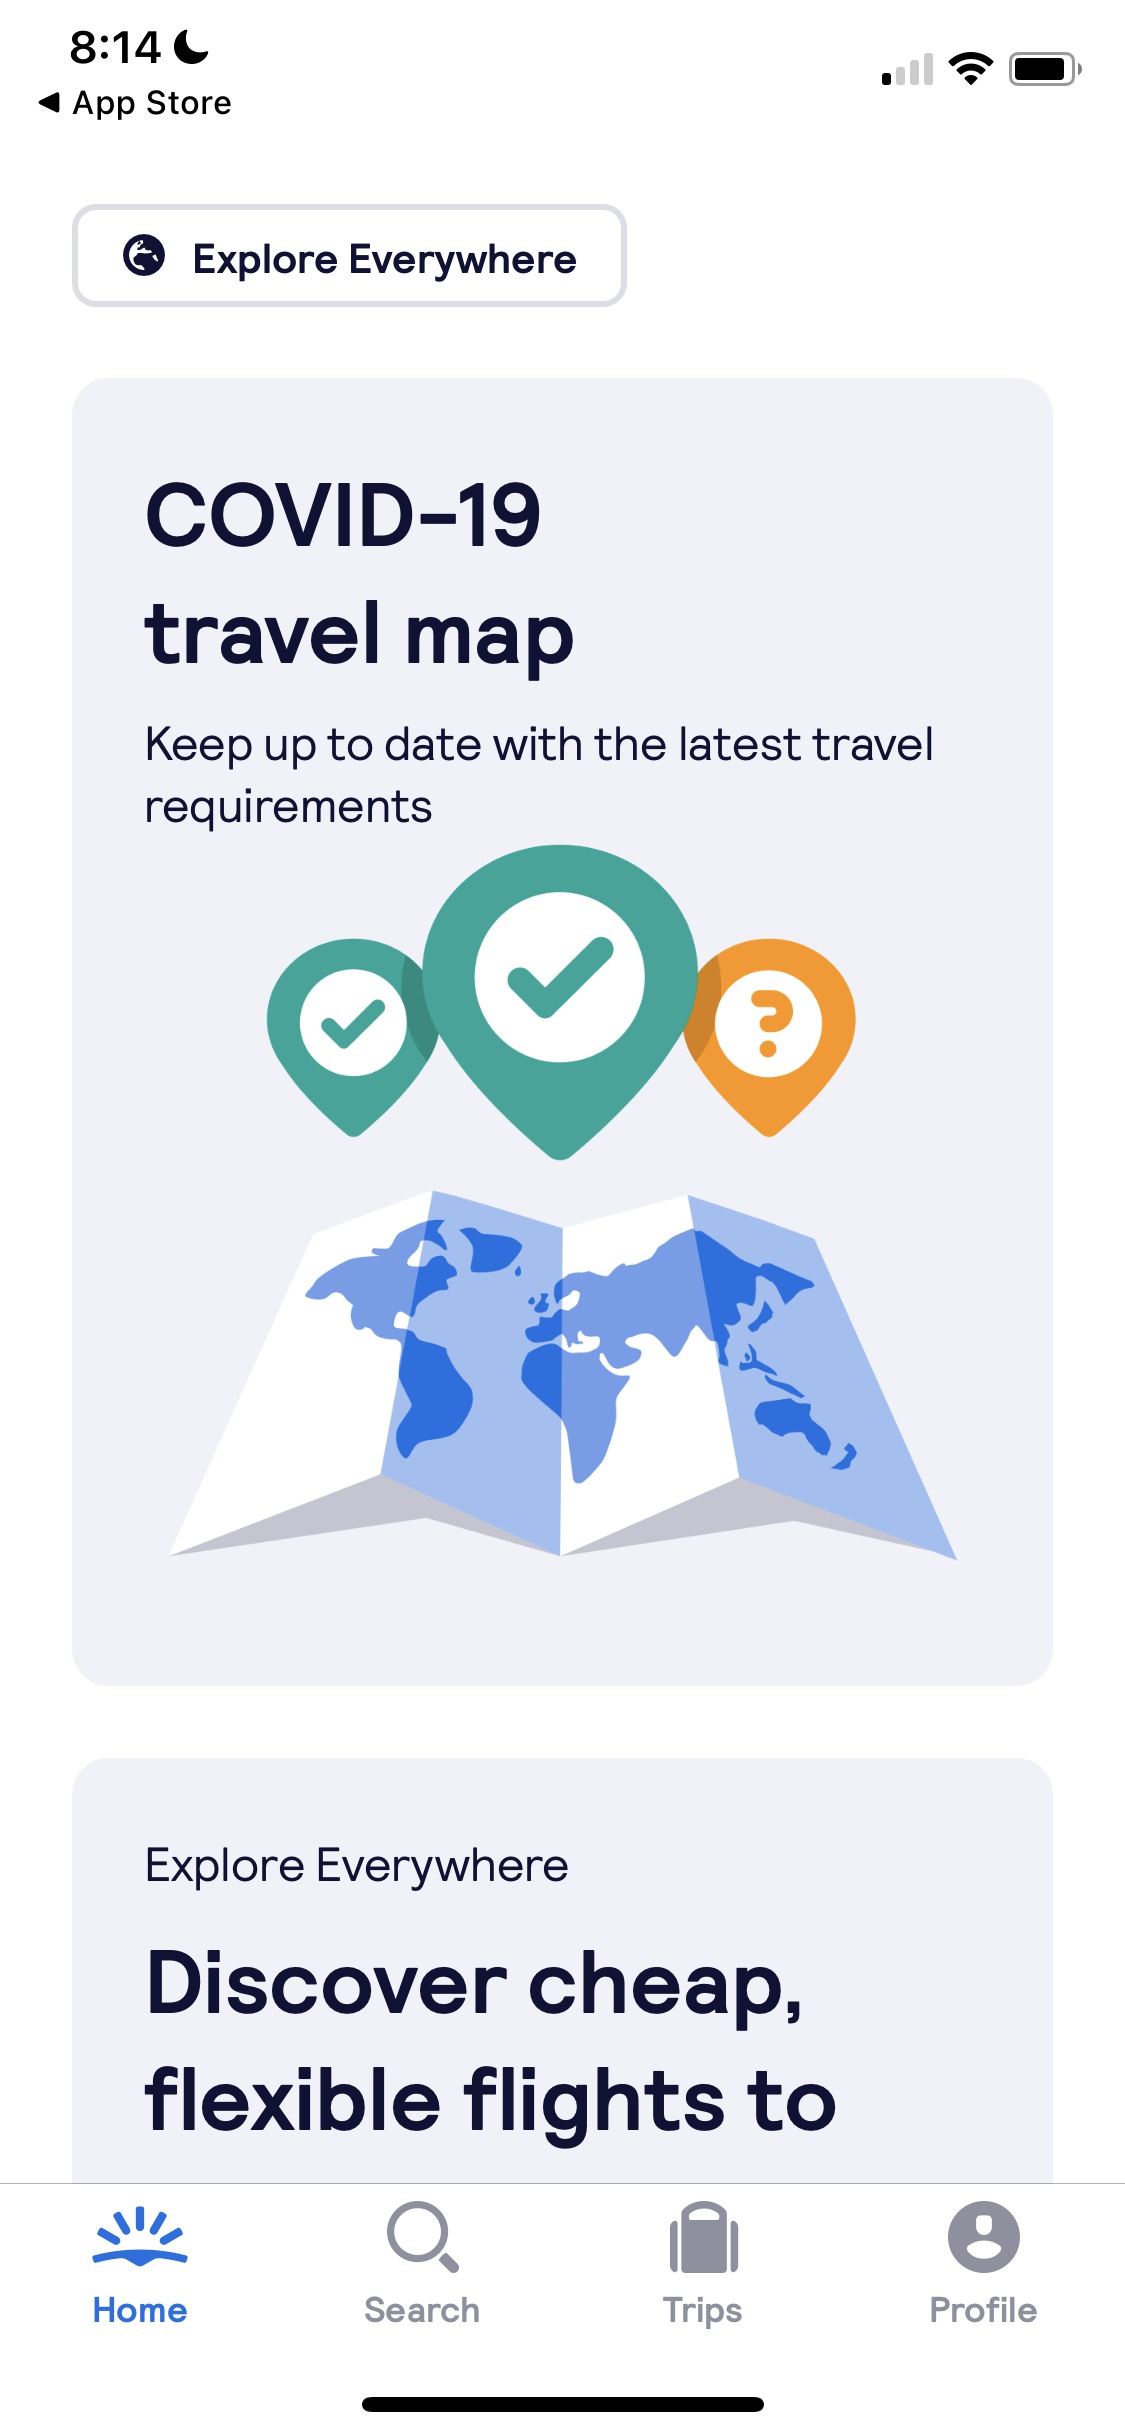 for iphone download Skyscanner